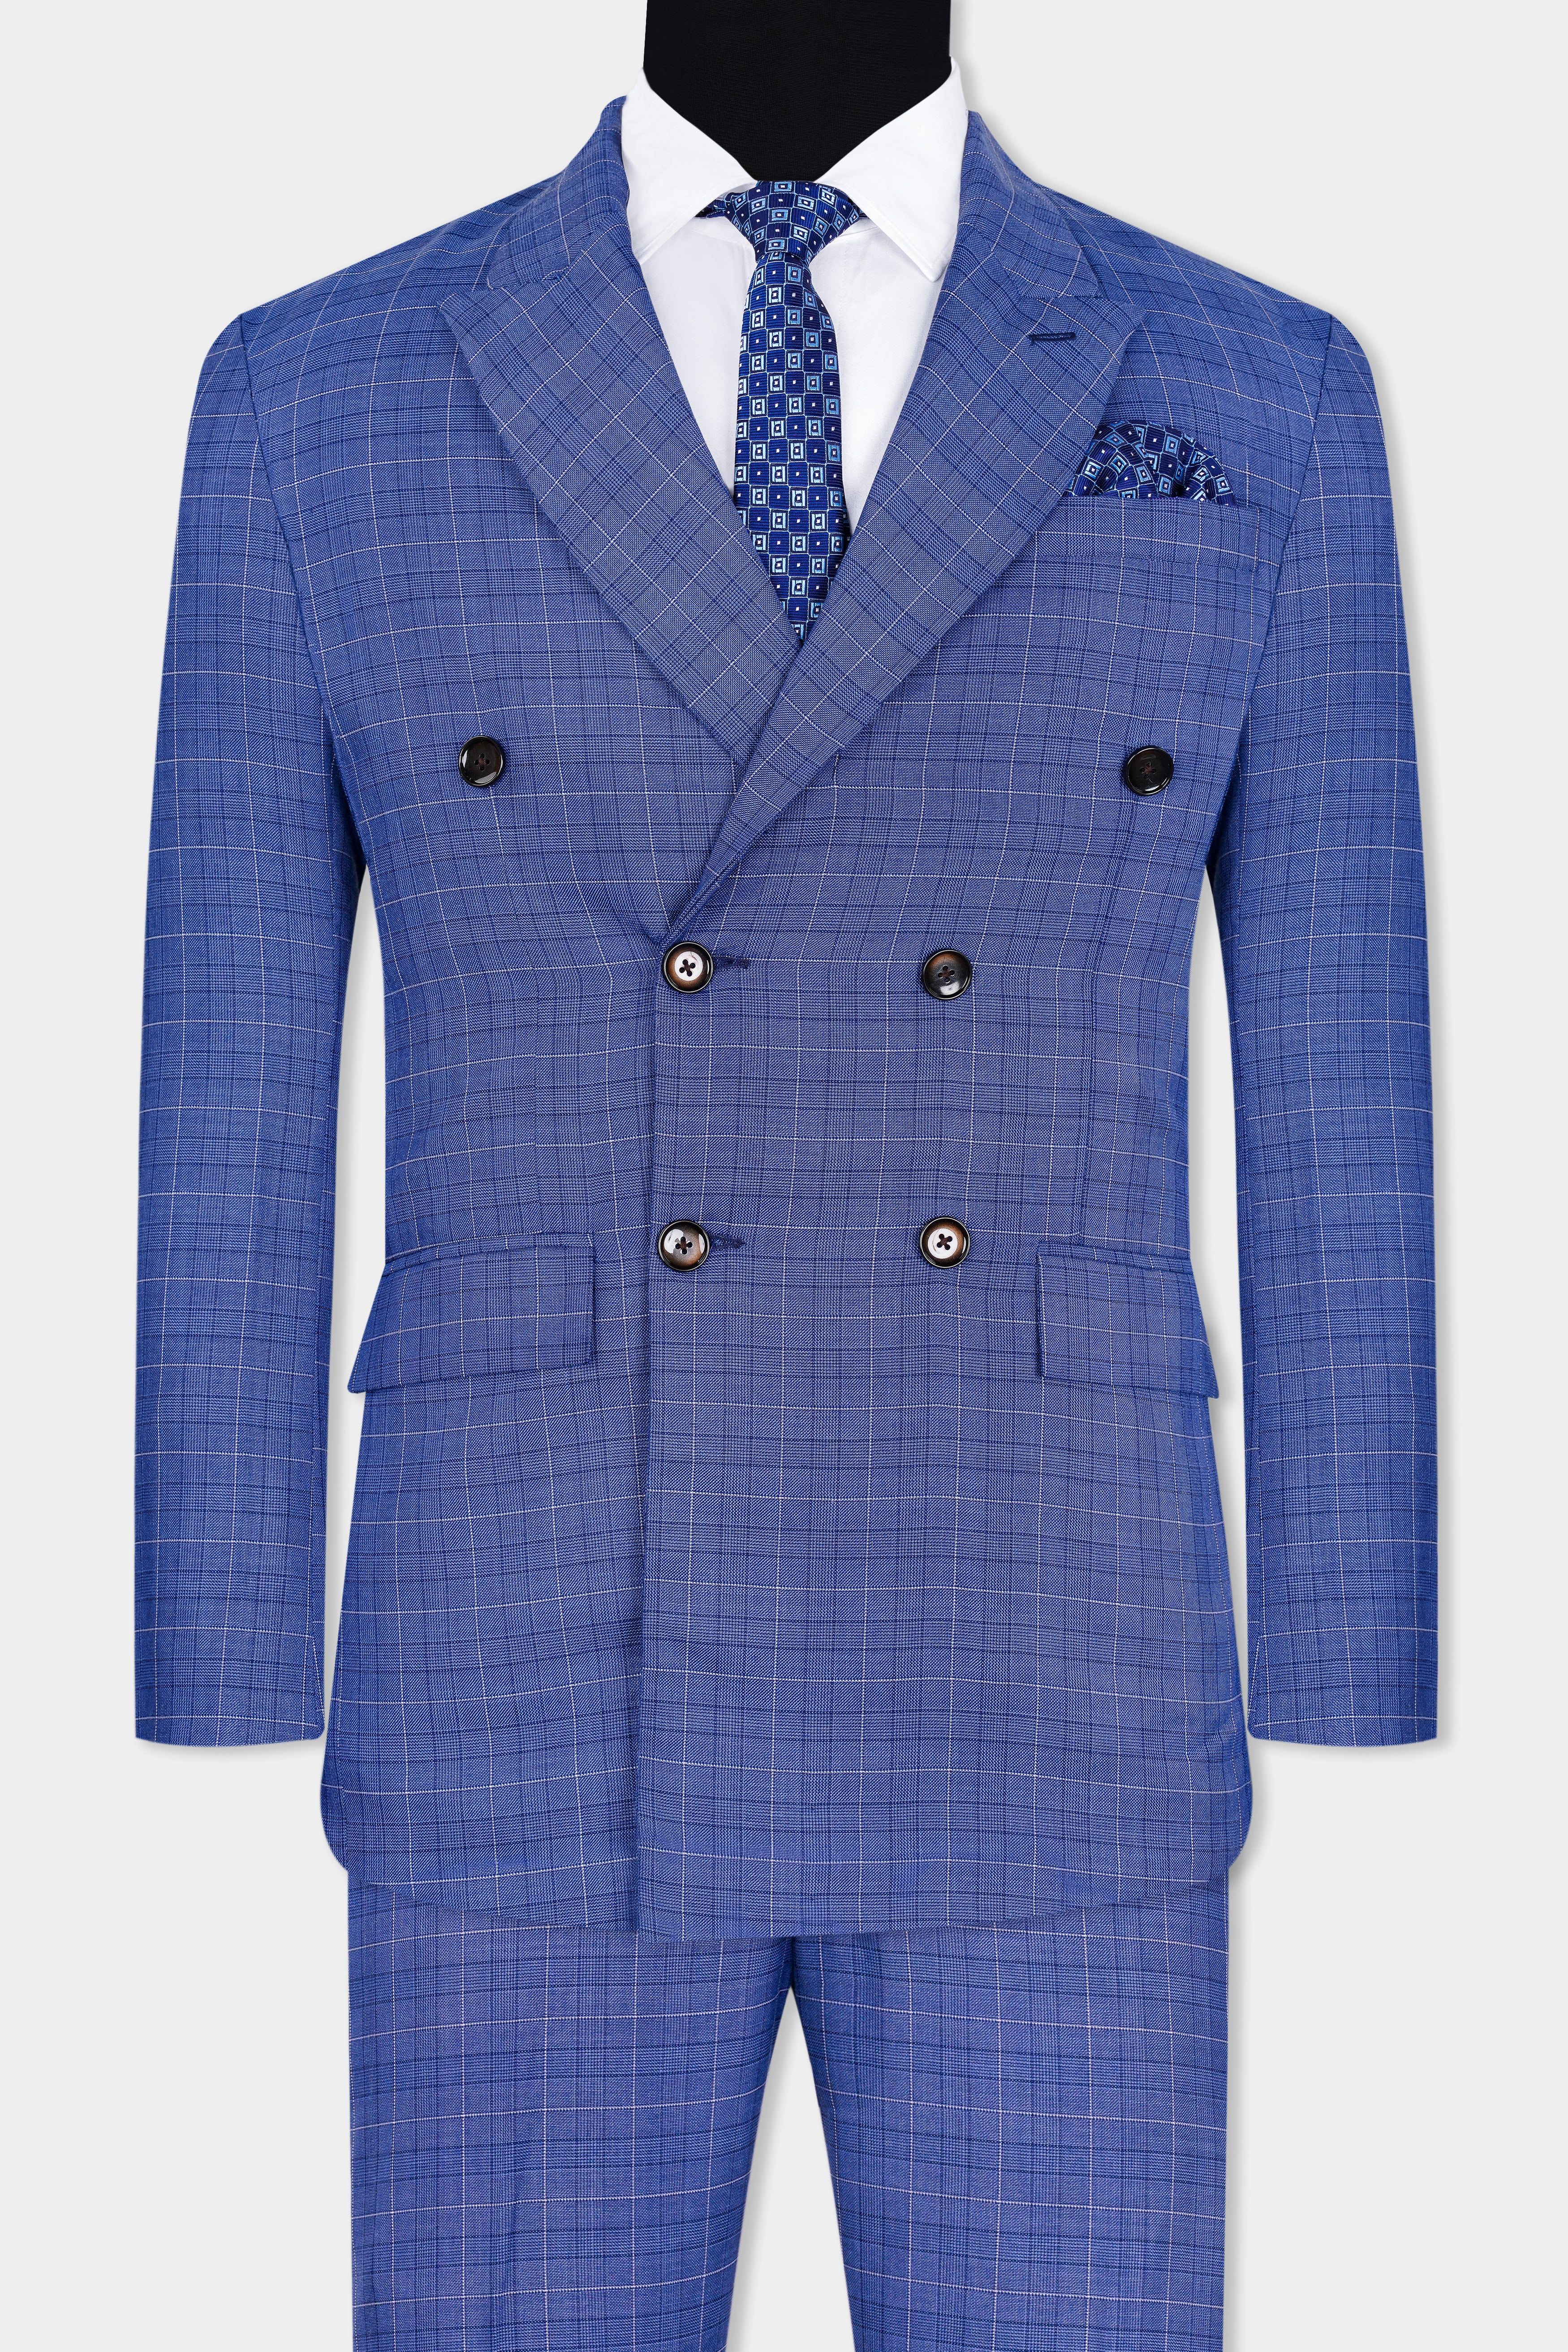 Yonder Blue Plaid Wool Rich Double Breasted Suit ST2944-DB-36, ST2944-DB-38, ST2944-DB-40, ST2944-DB-42, ST2944-DB-44, ST2944-DB-46, ST2944-DB-48, ST2944-DB-50, ST2944-DB-52, ST2944-DB-54, ST2944-DB-56, ST2944-DB-58, ST2944-DB-60